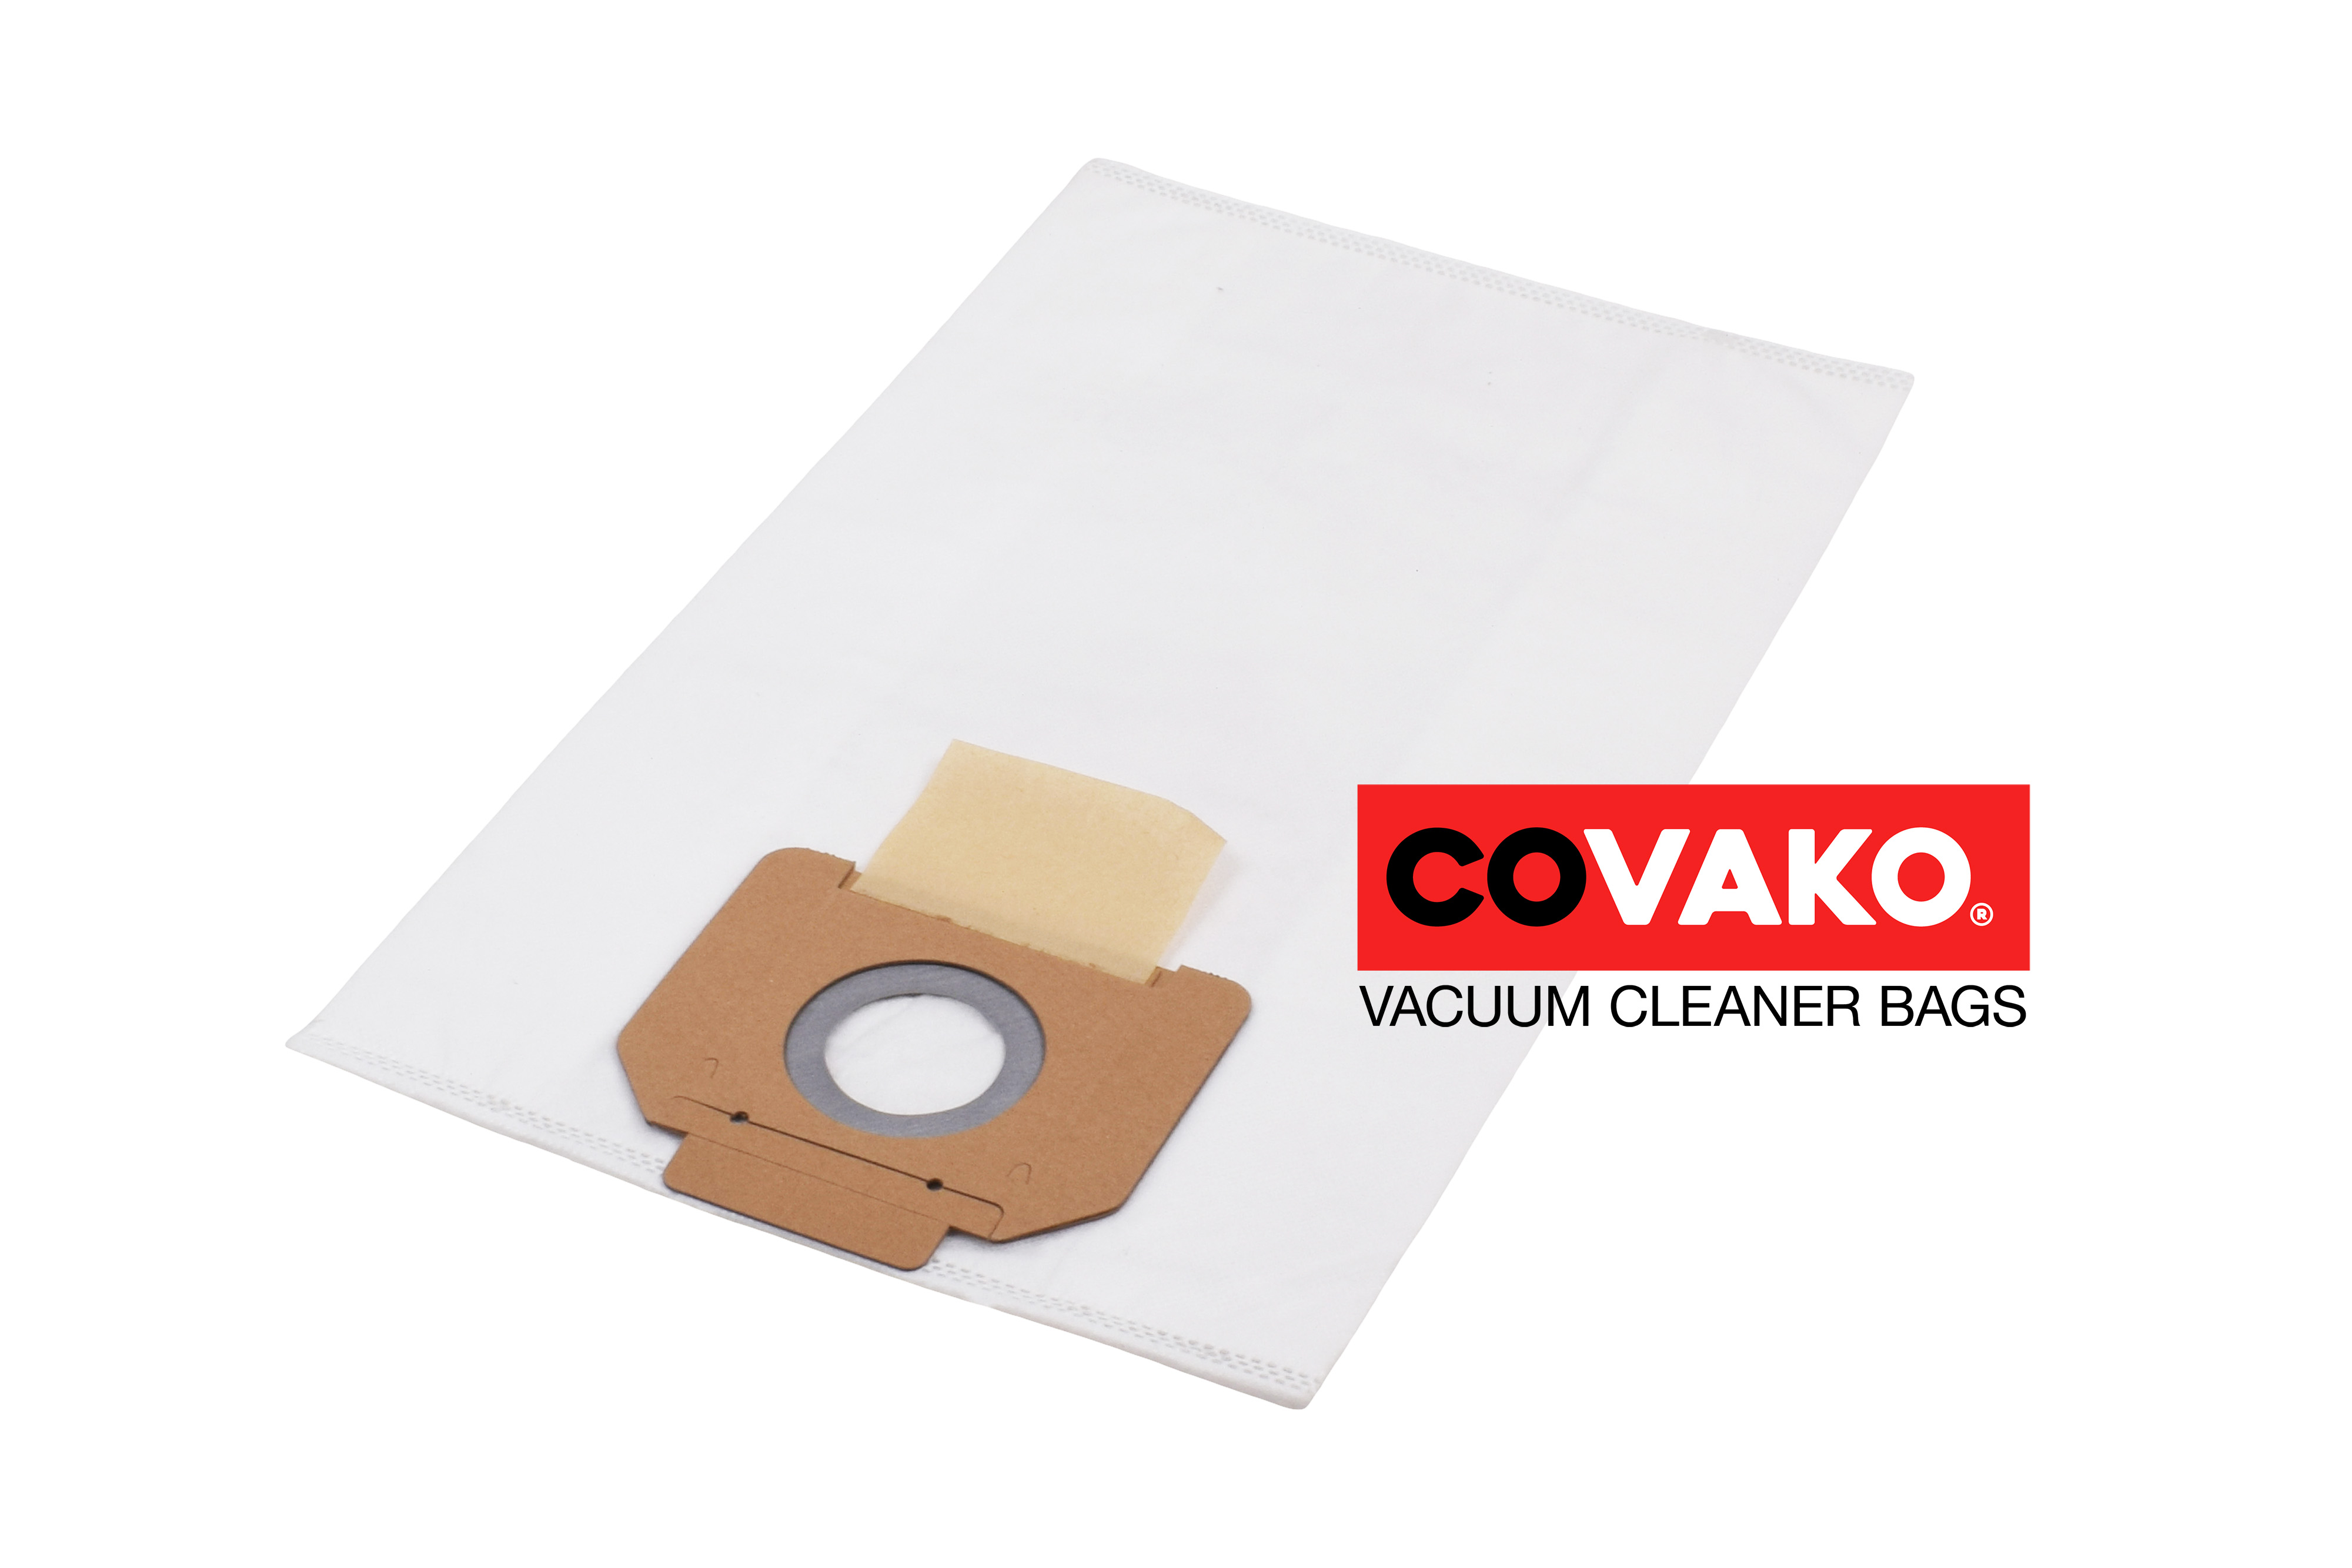 ICA YS 1300-16 / Synthesis - ICA vacuum cleaner bags